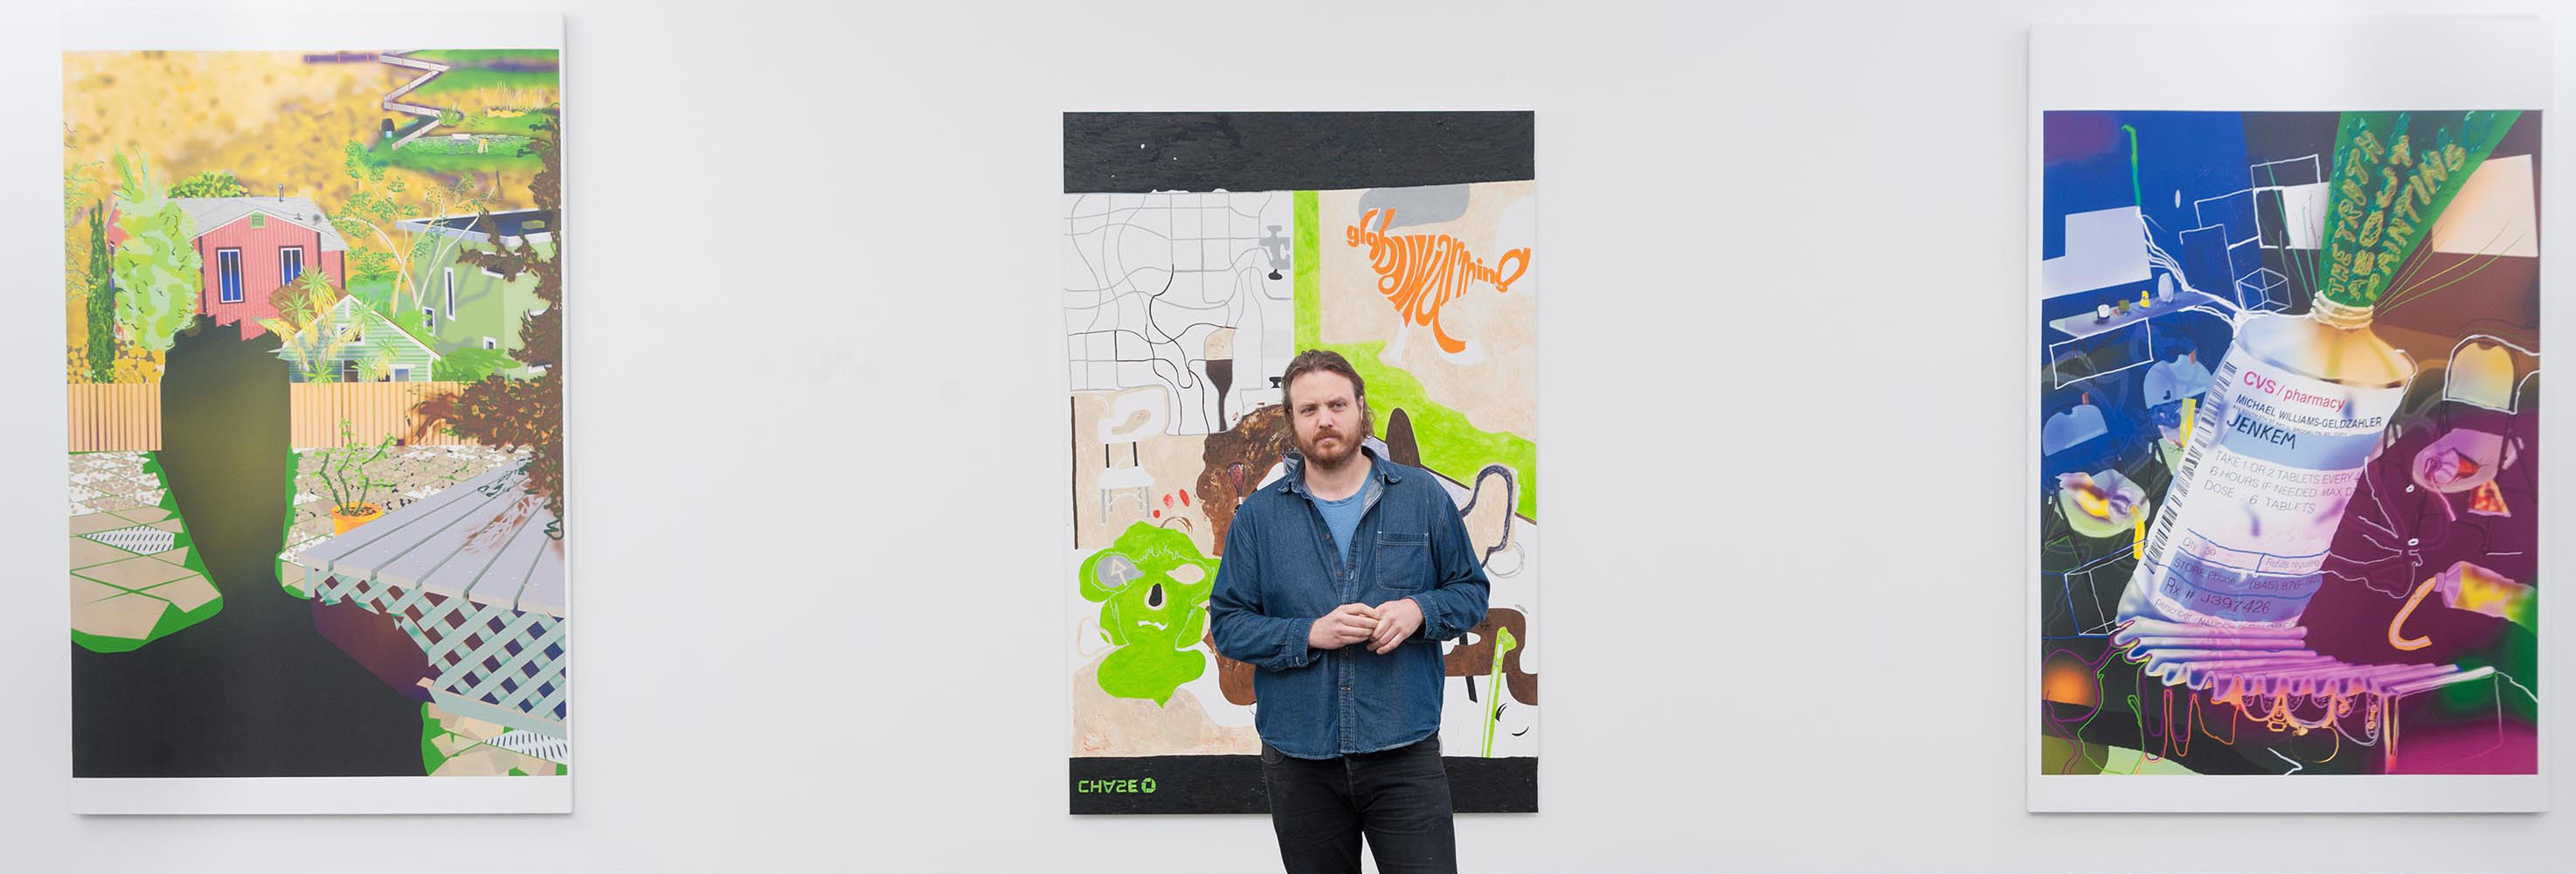 Artist Michael Williams stands in a gallery with 3 large colorful canvases behind him.